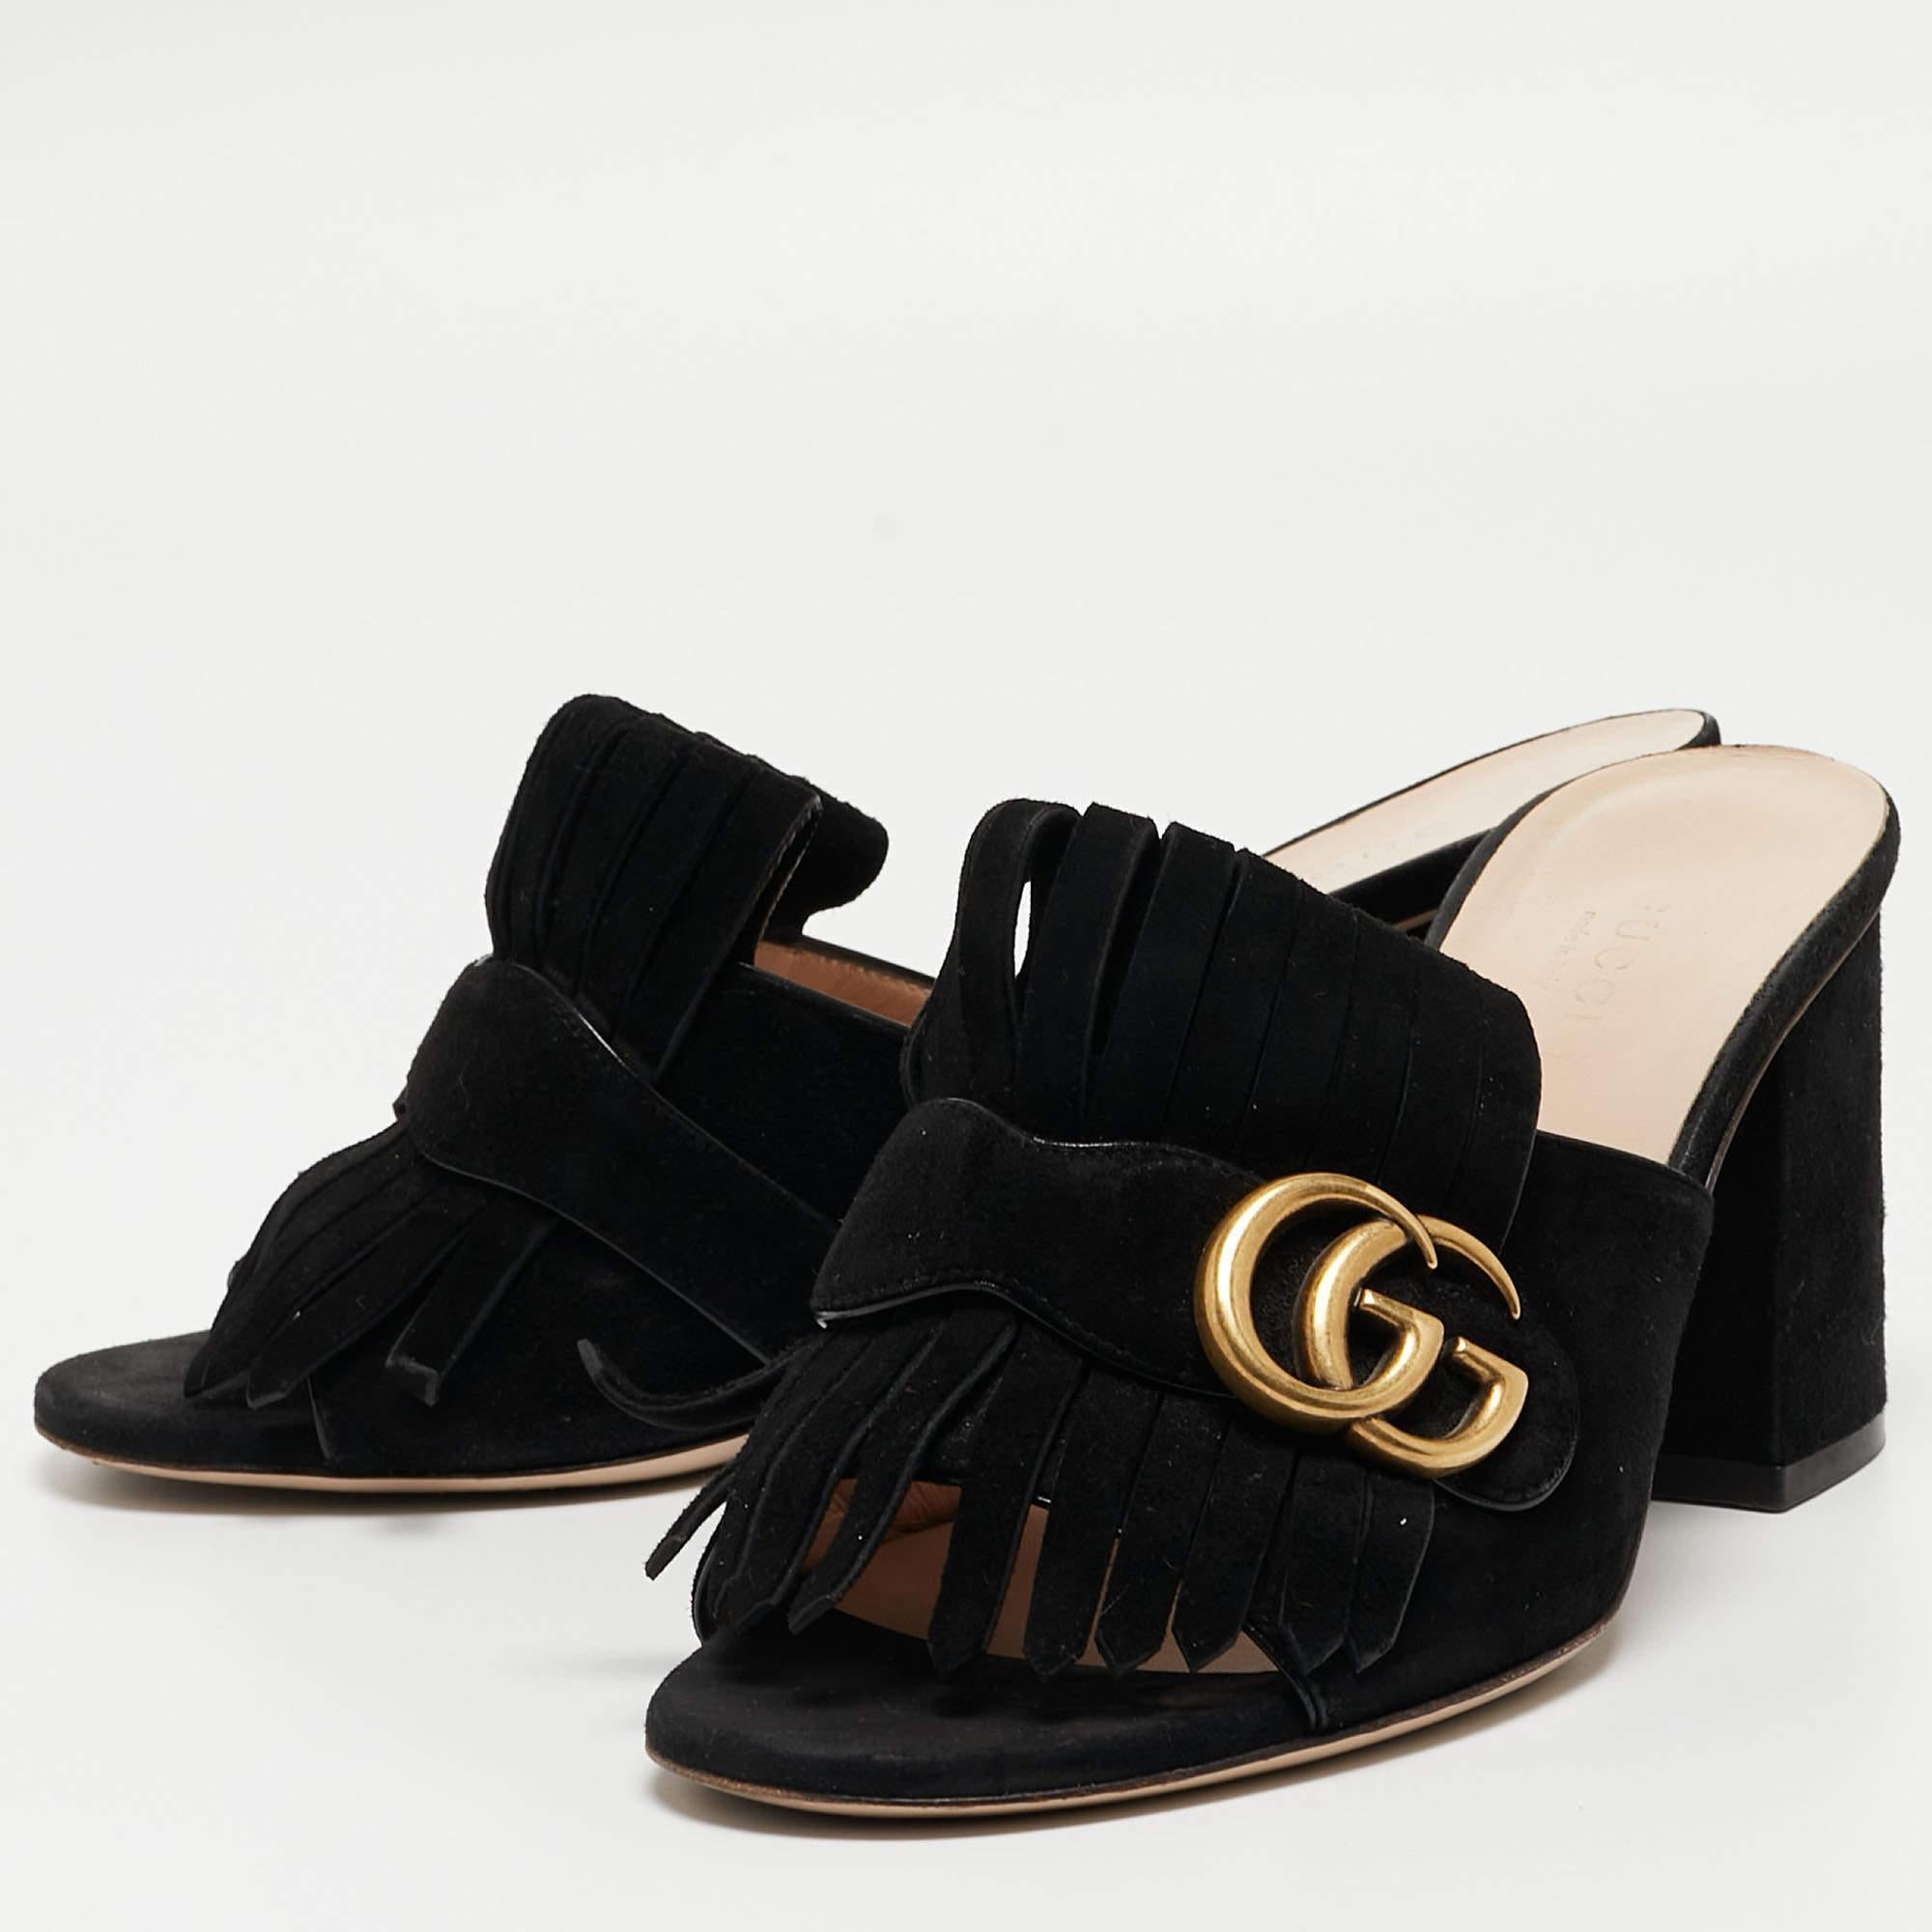 These timeless Gucci GG Marmont slides for women are meant to last you season after season. They have a comfortable fit and high-quality finish.

